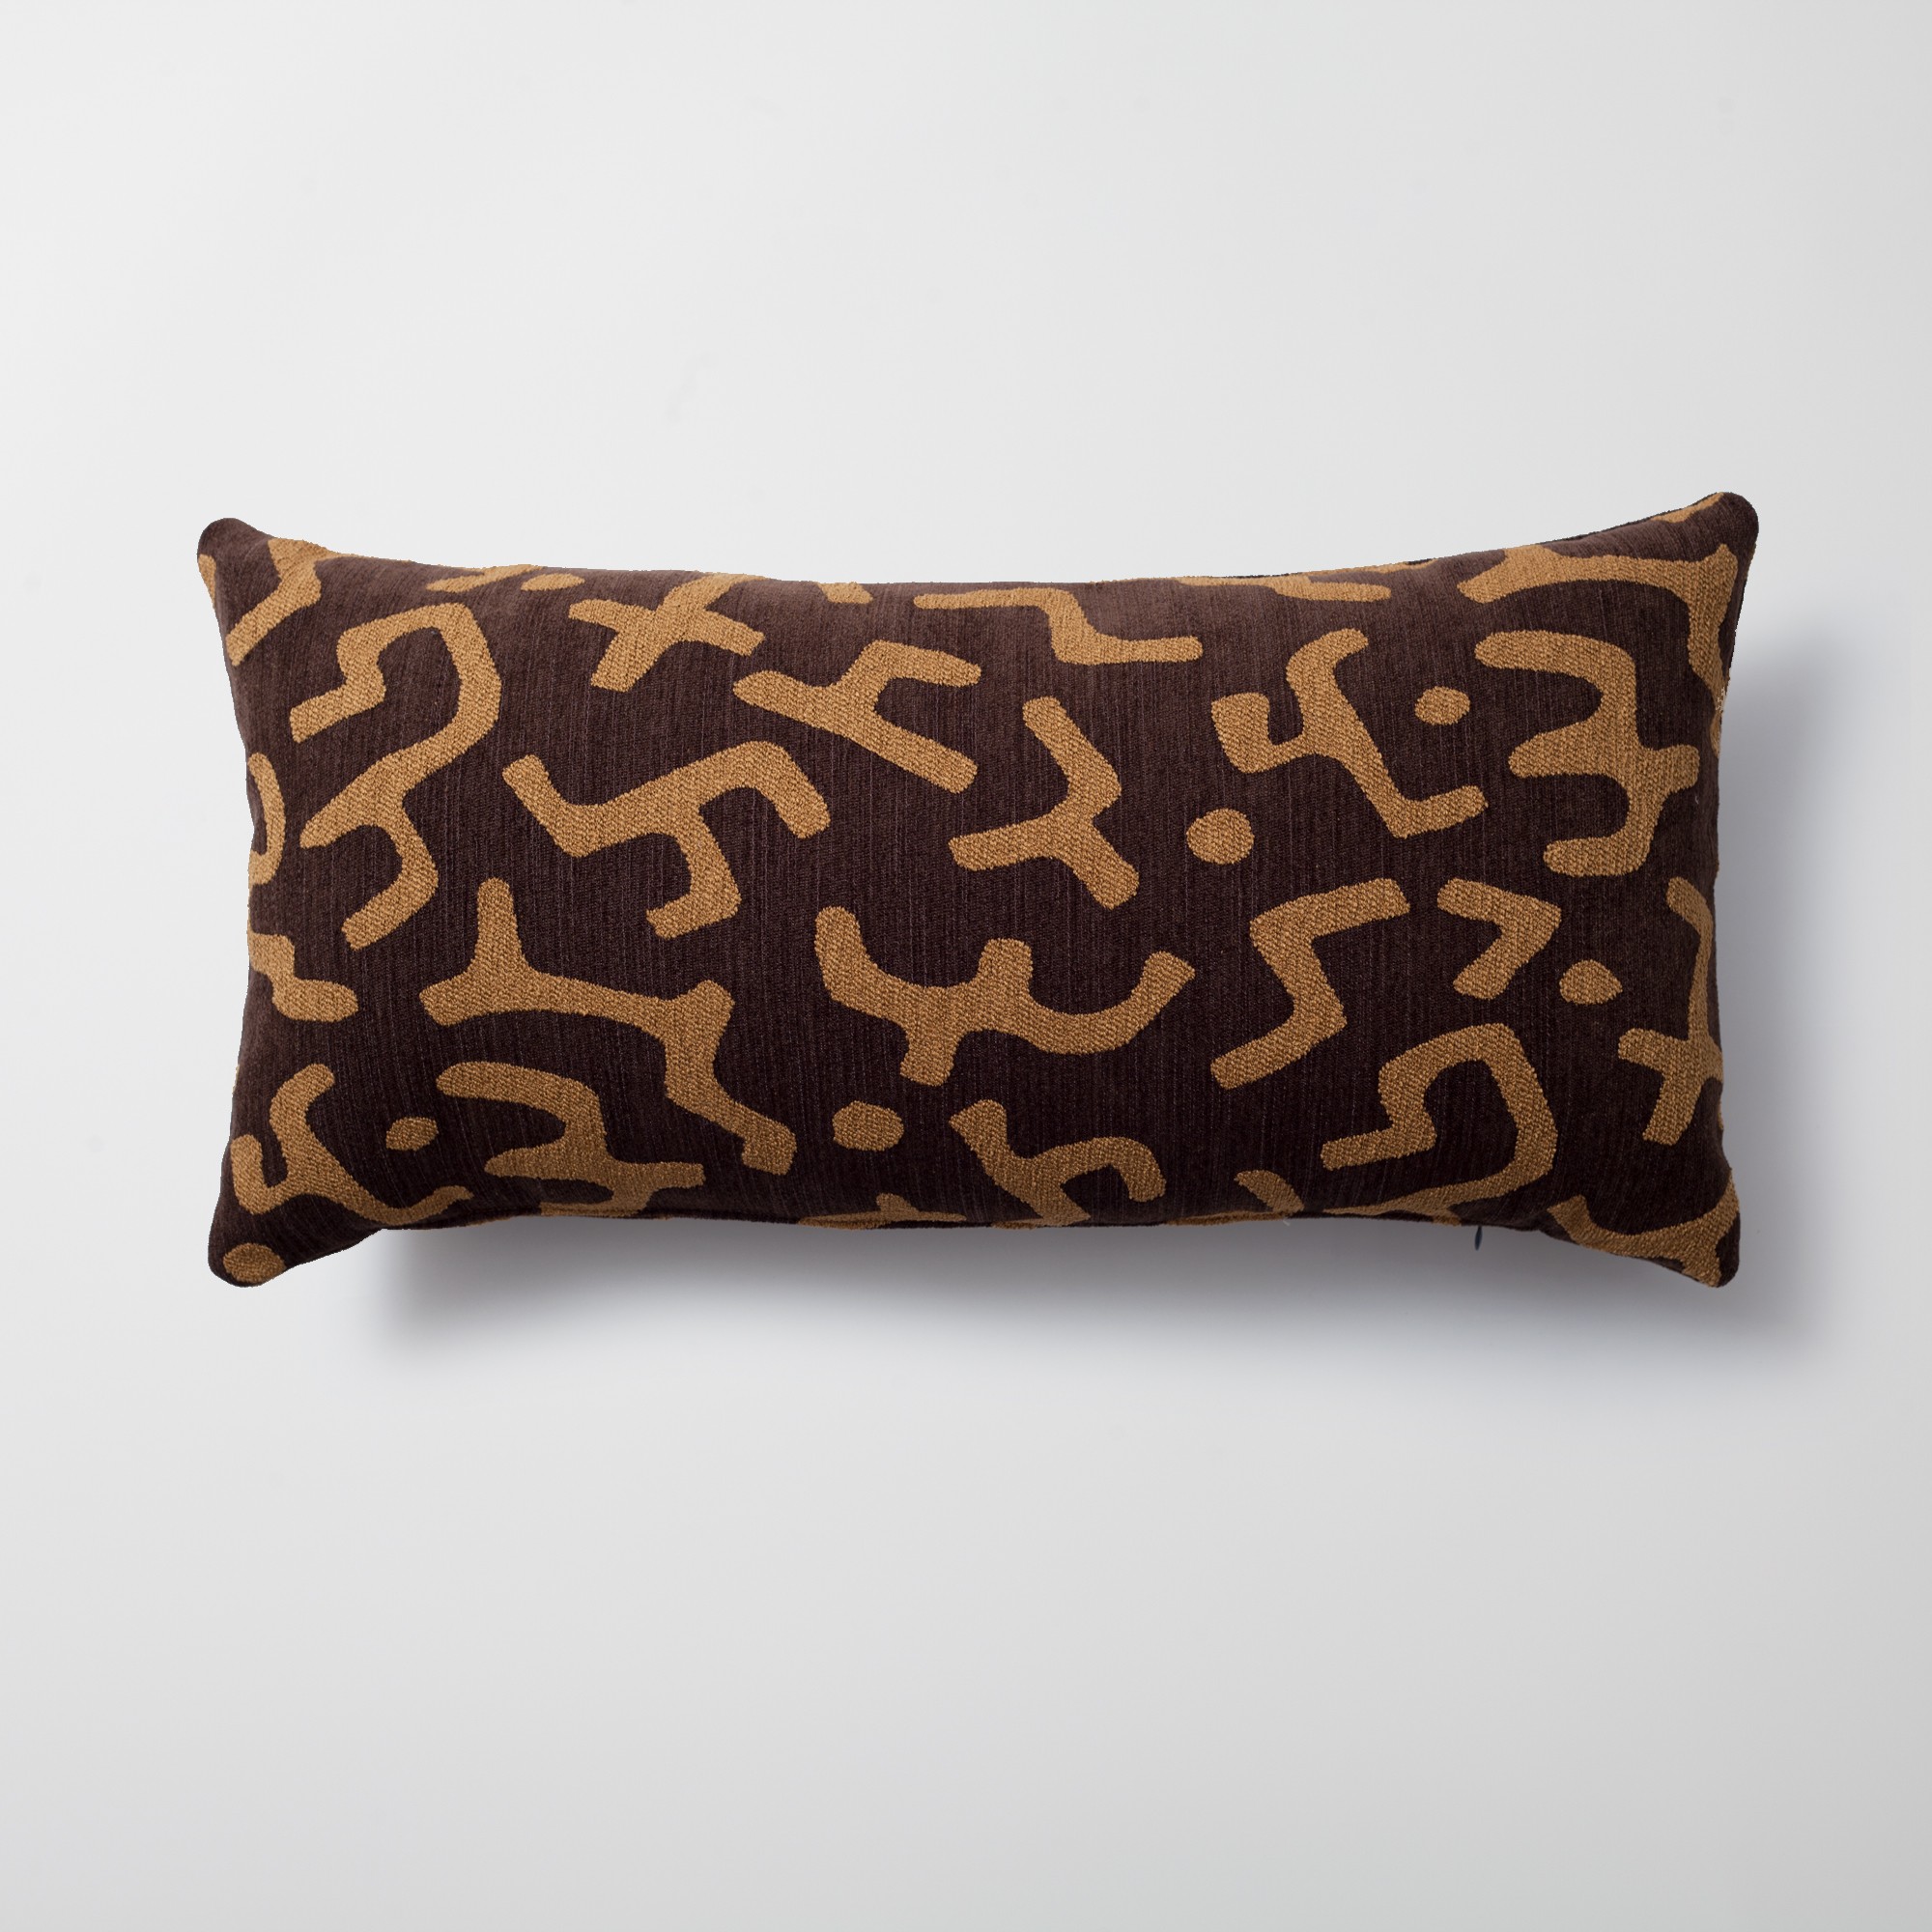 "Nandos" - Maze Patterned 14x28 Inch Pillow - Brown (Cover Only)